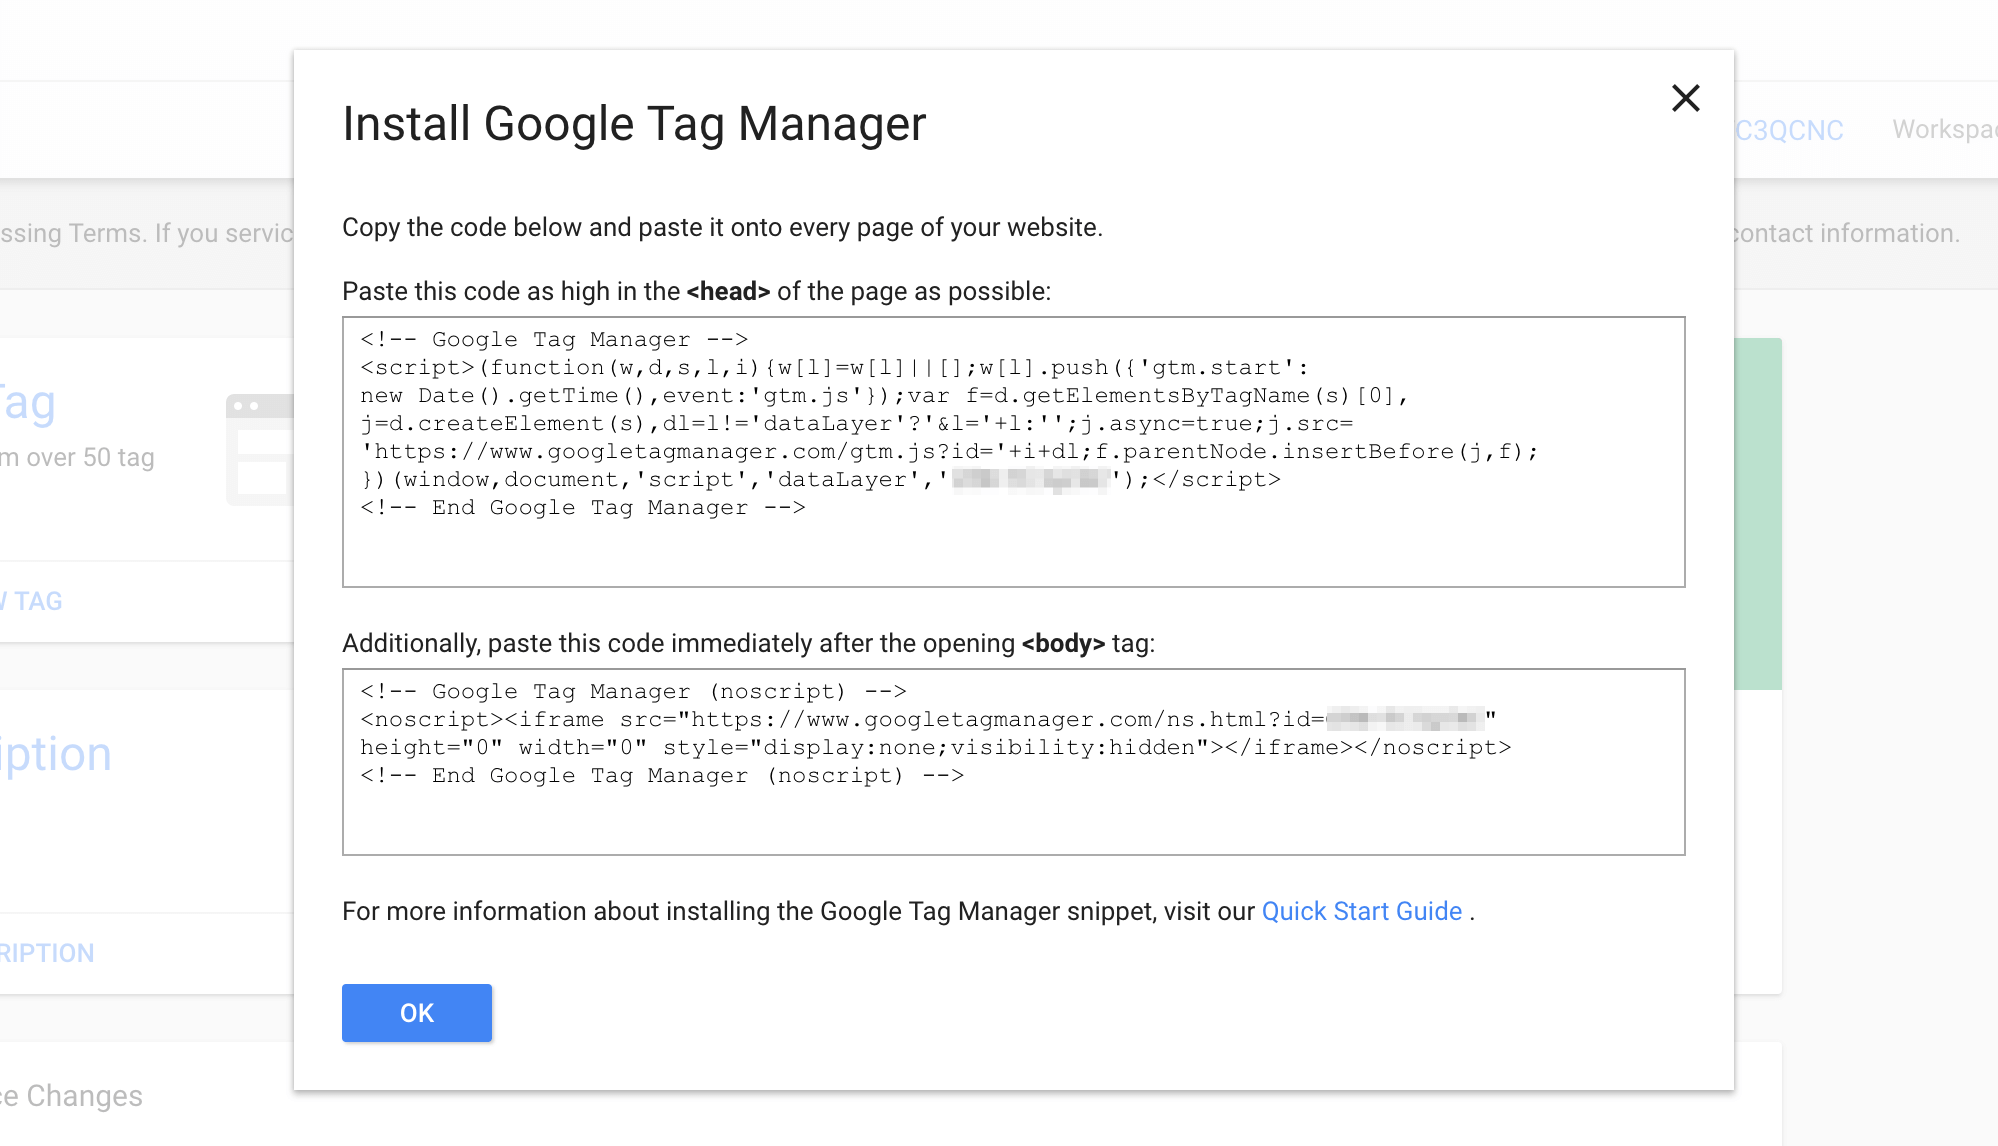 The code snippets used to implement Google Tag Manager on your site.